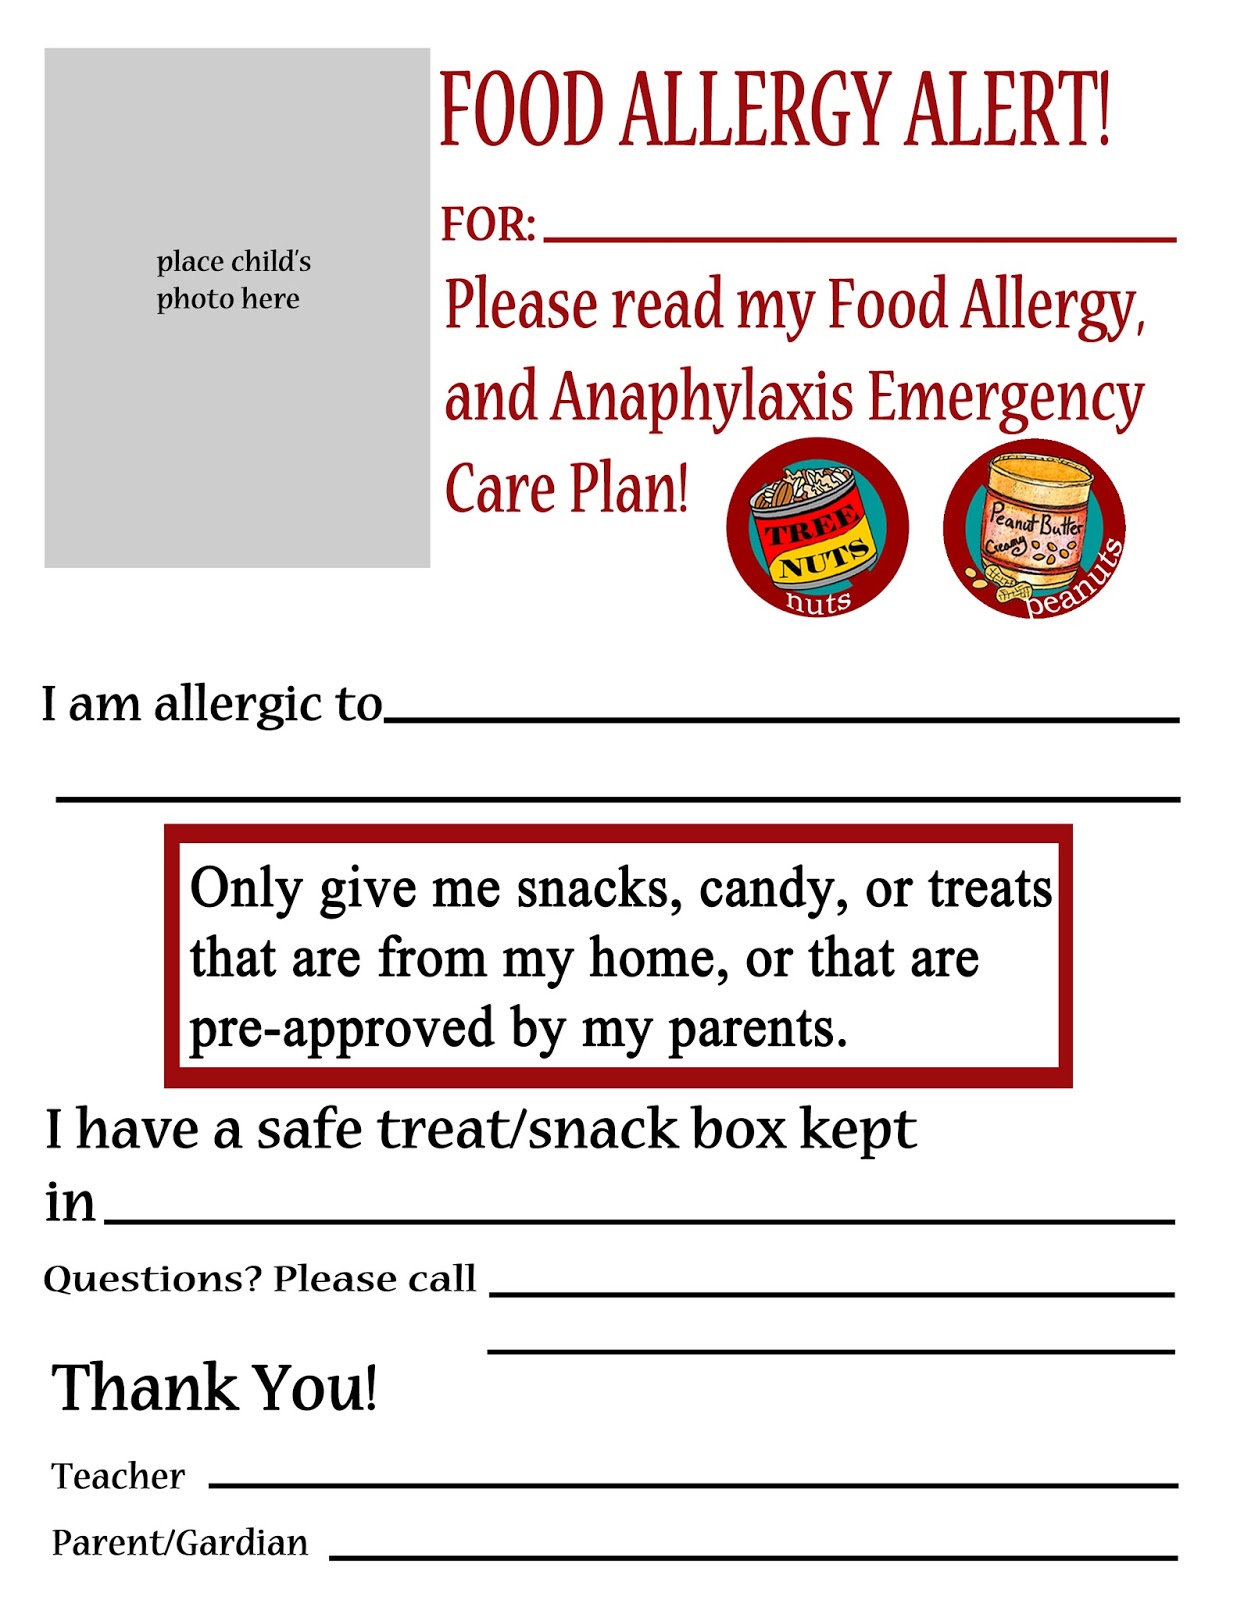 Thriving With Allergies: Peanut, tree-nut free classroom poster, Food Allergy ...1237 x 1600